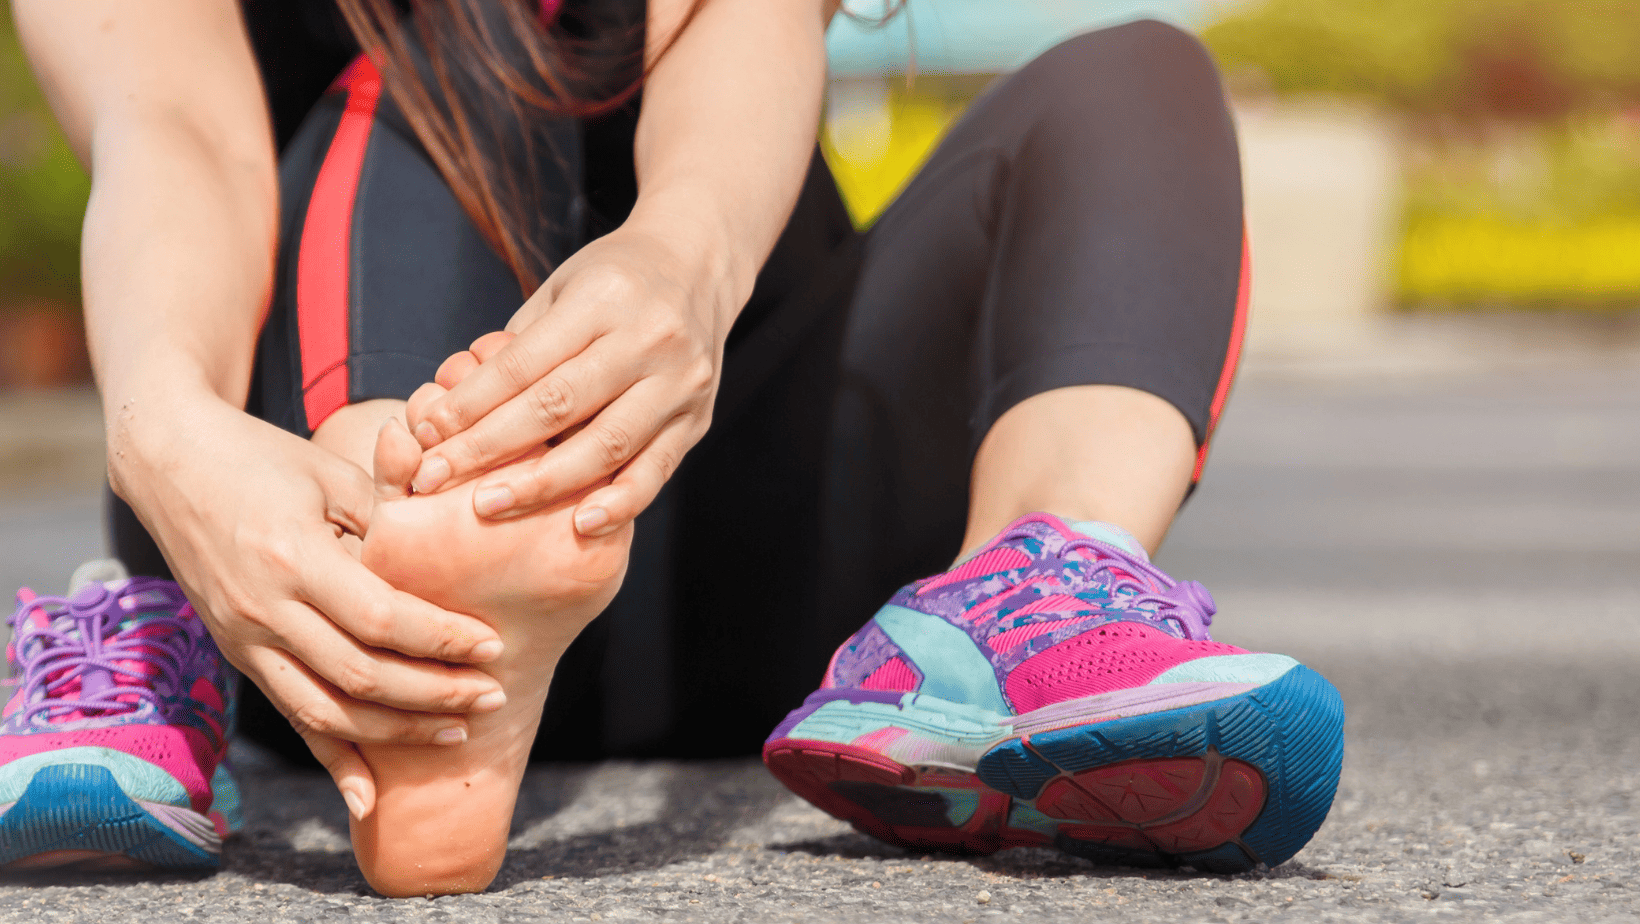 5 Tips That Will Help You With Foot and Ankle Pain